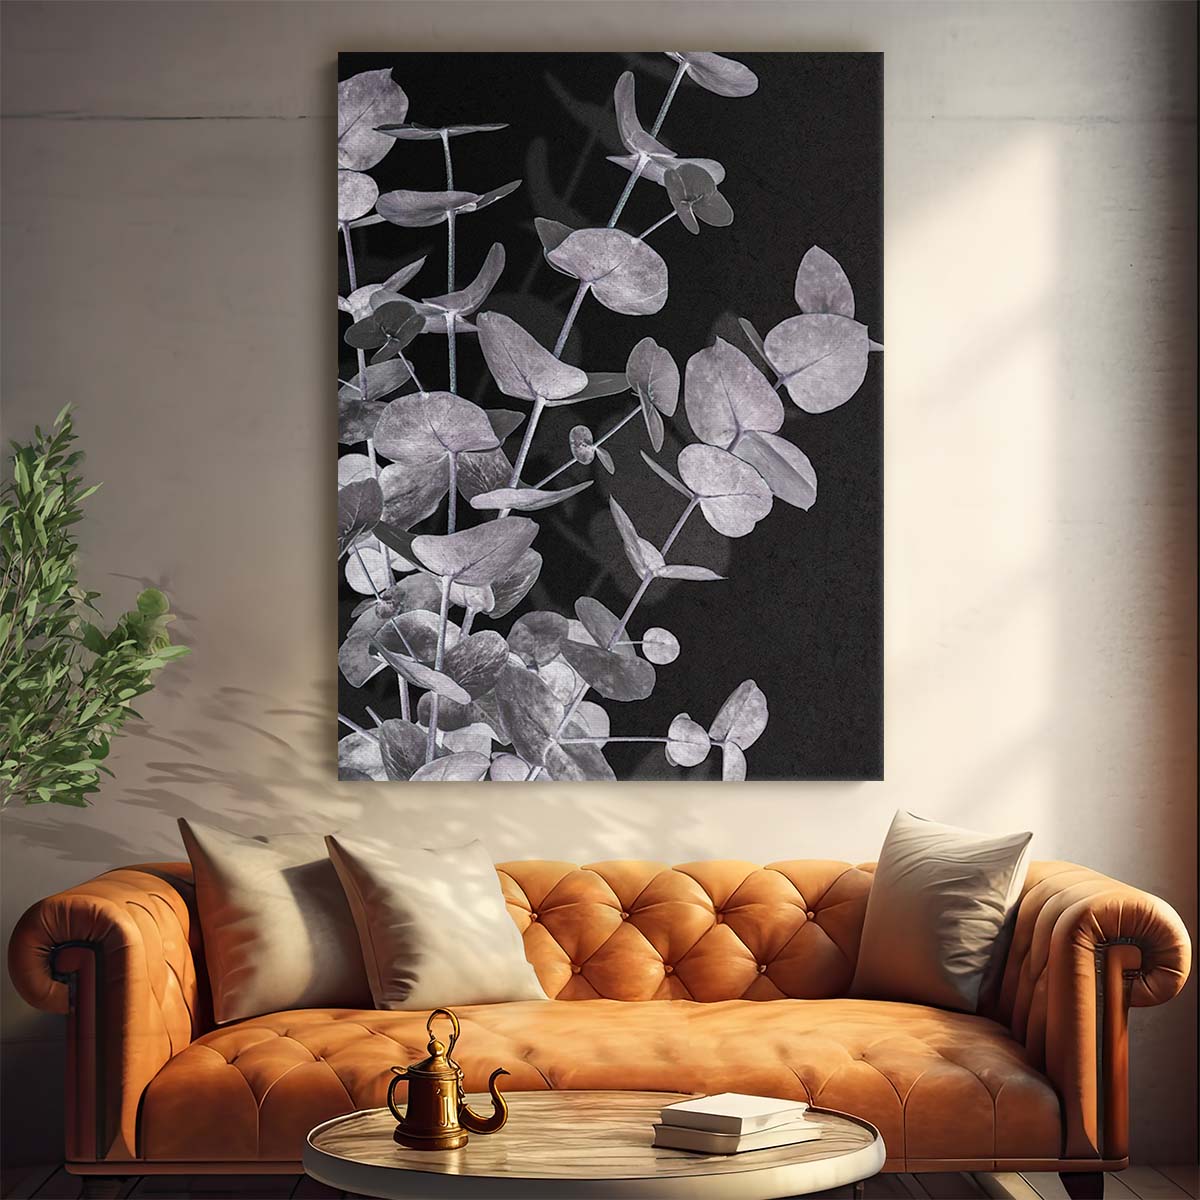 Botanical Eucalyptus Plant Photography on Dark Background by Luxuriance Designs, made in USA